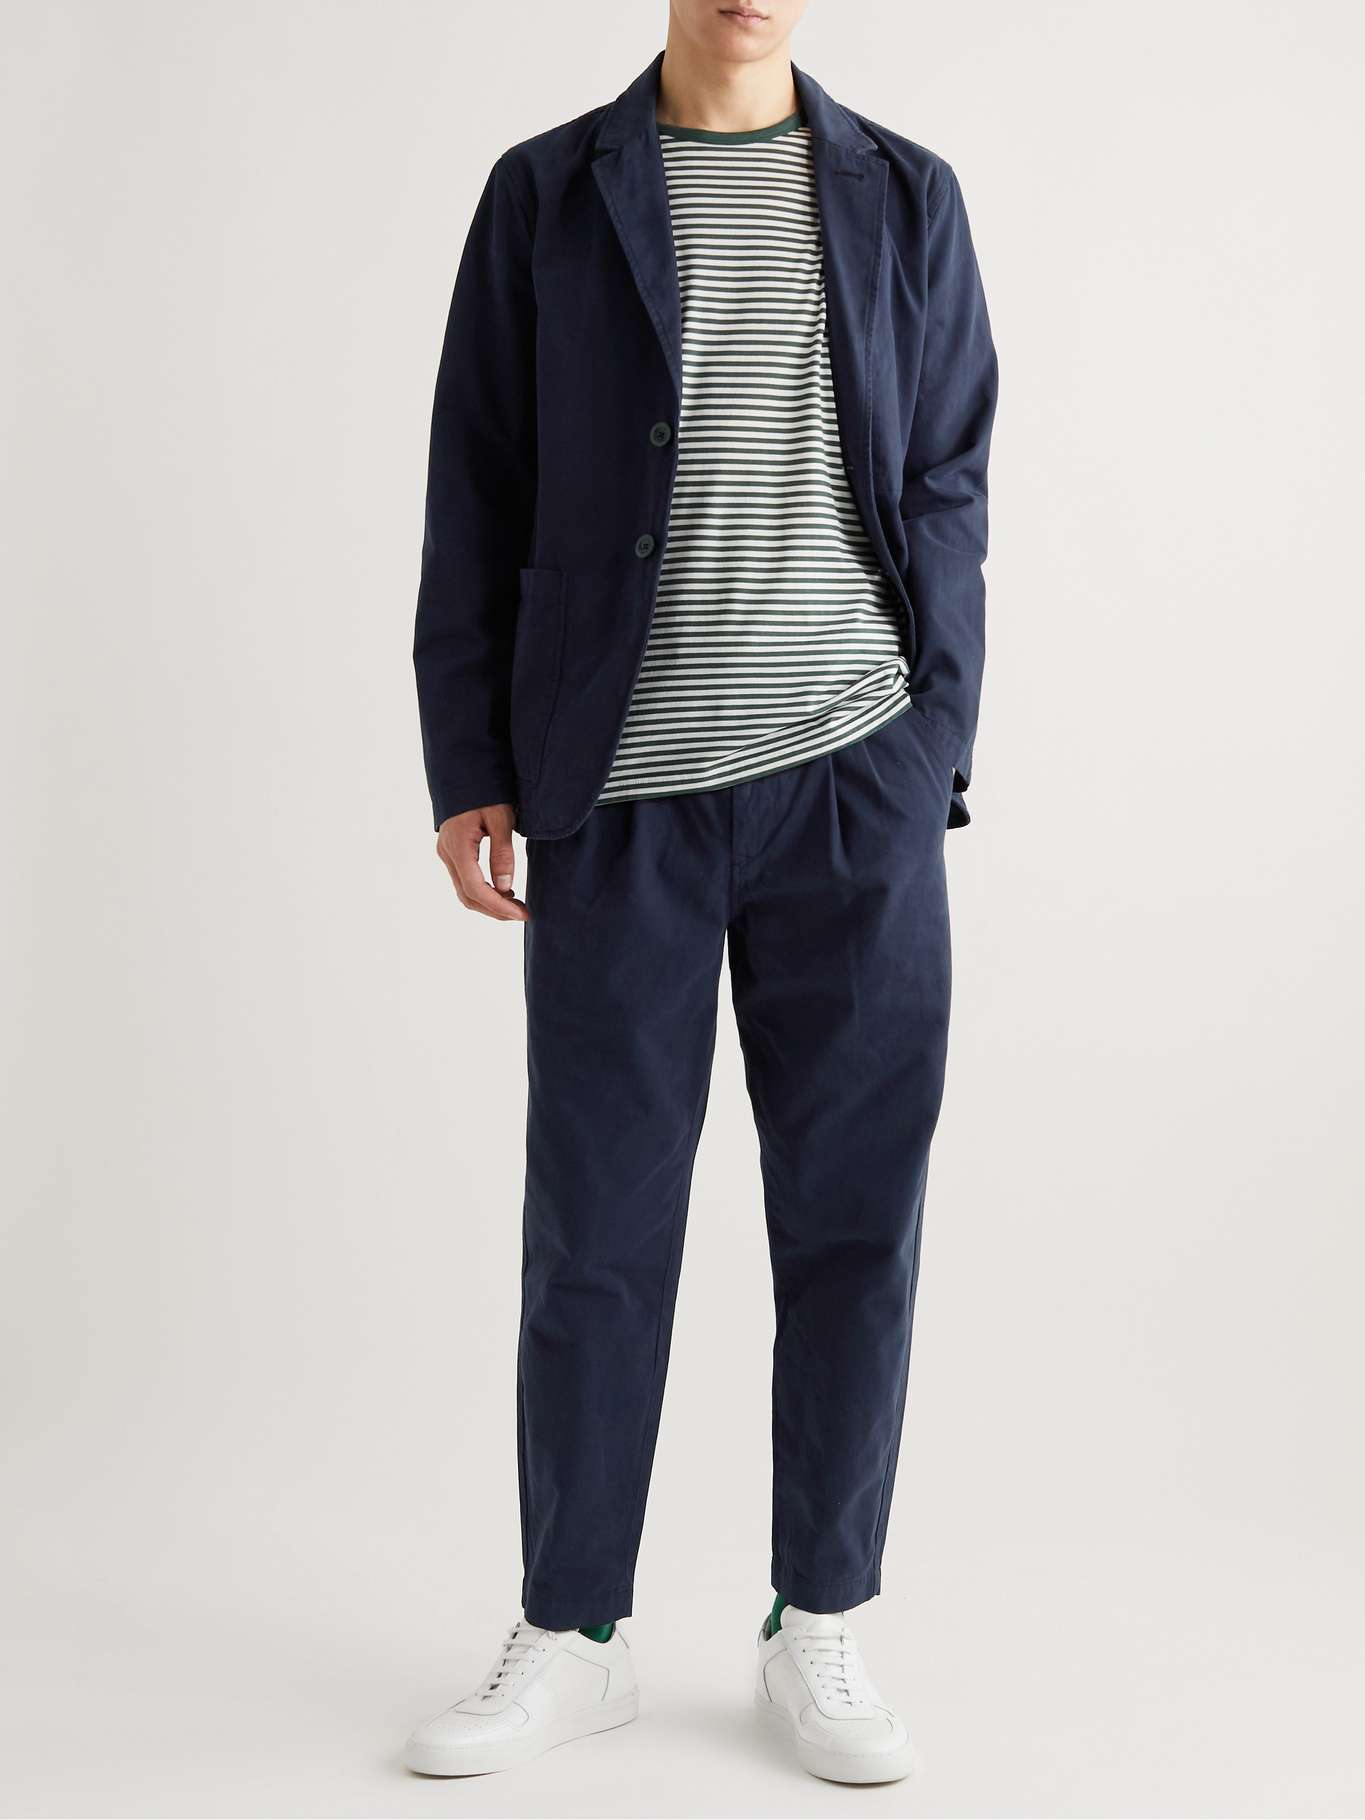 MR P. Tapered Cropped Garment-Dyed Organic Cotton-Twill Trousers for ...